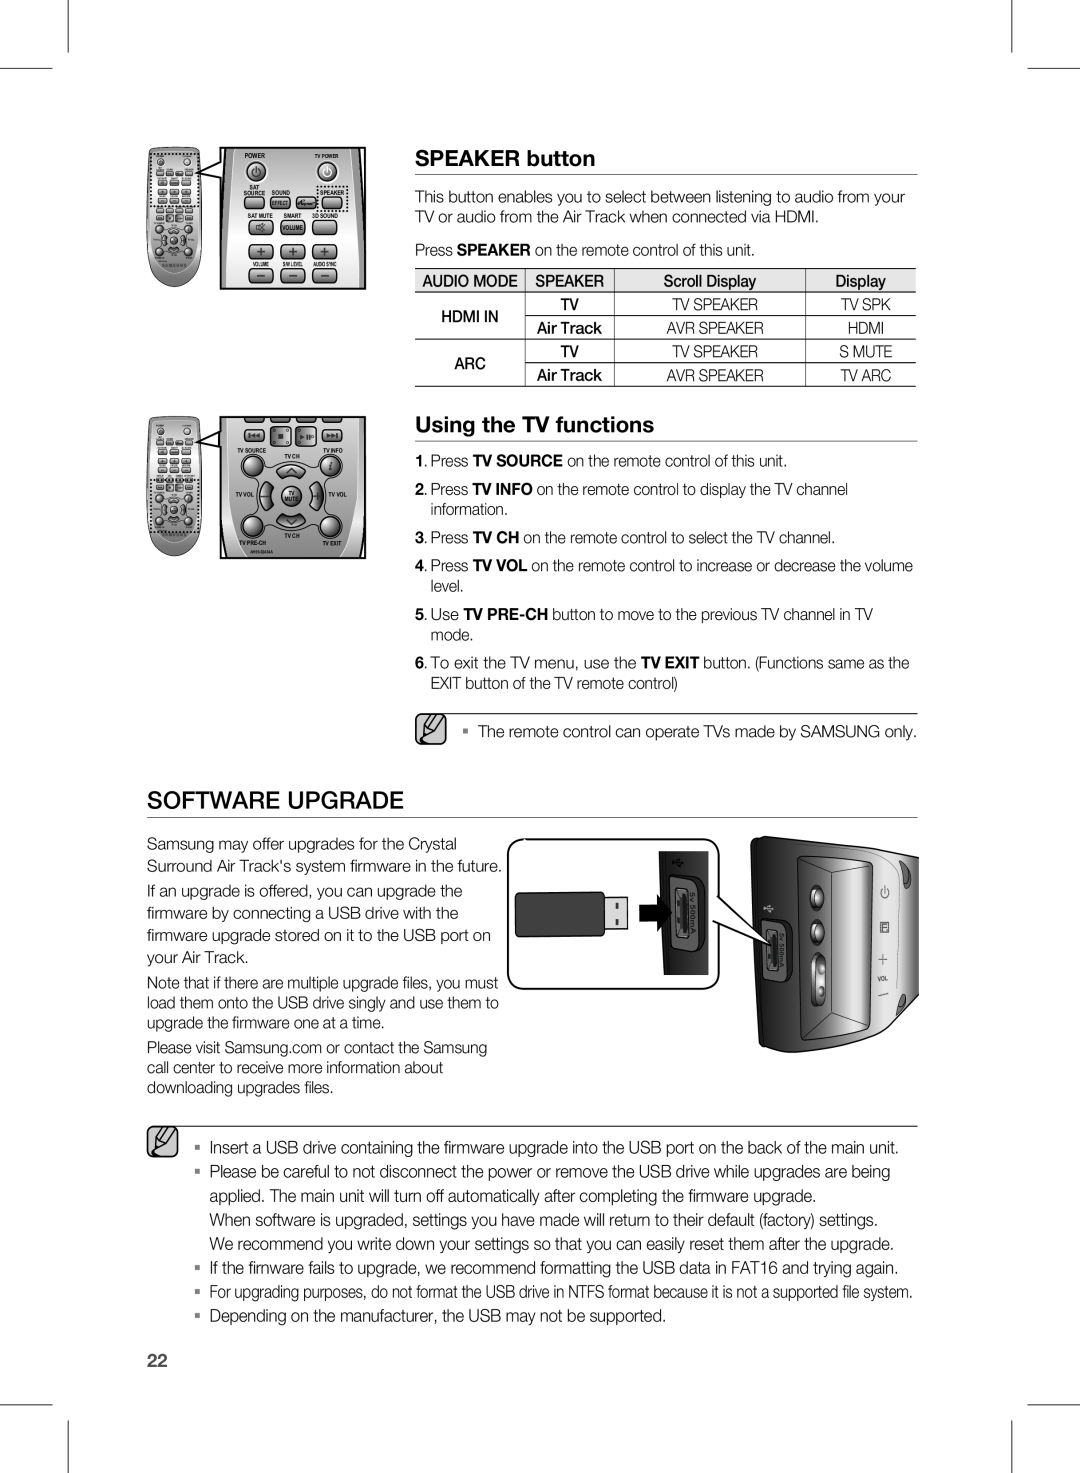 Samsung HW-E450 user manual Software Upgrade, SPEAKER button, Using the TV functions 